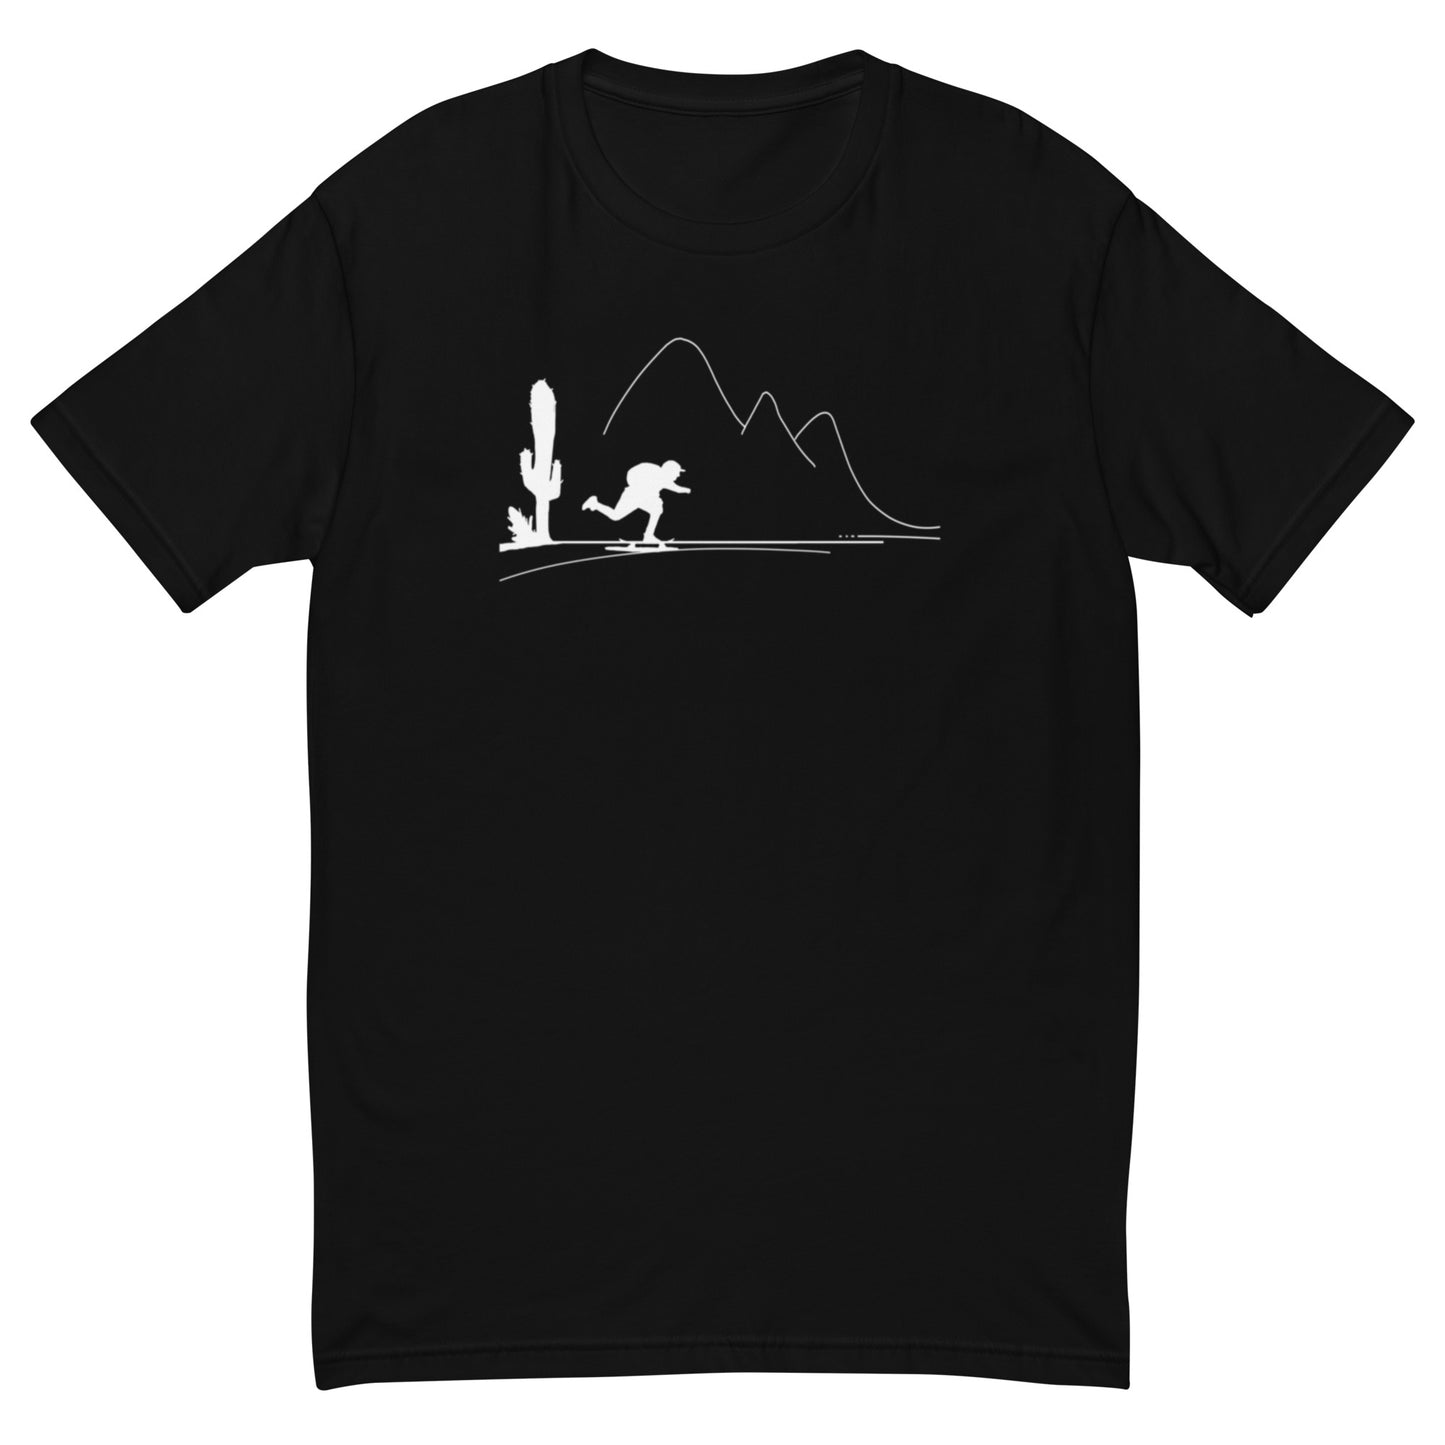 Chad Caruso Silhouette Short Sleeve T-shirt